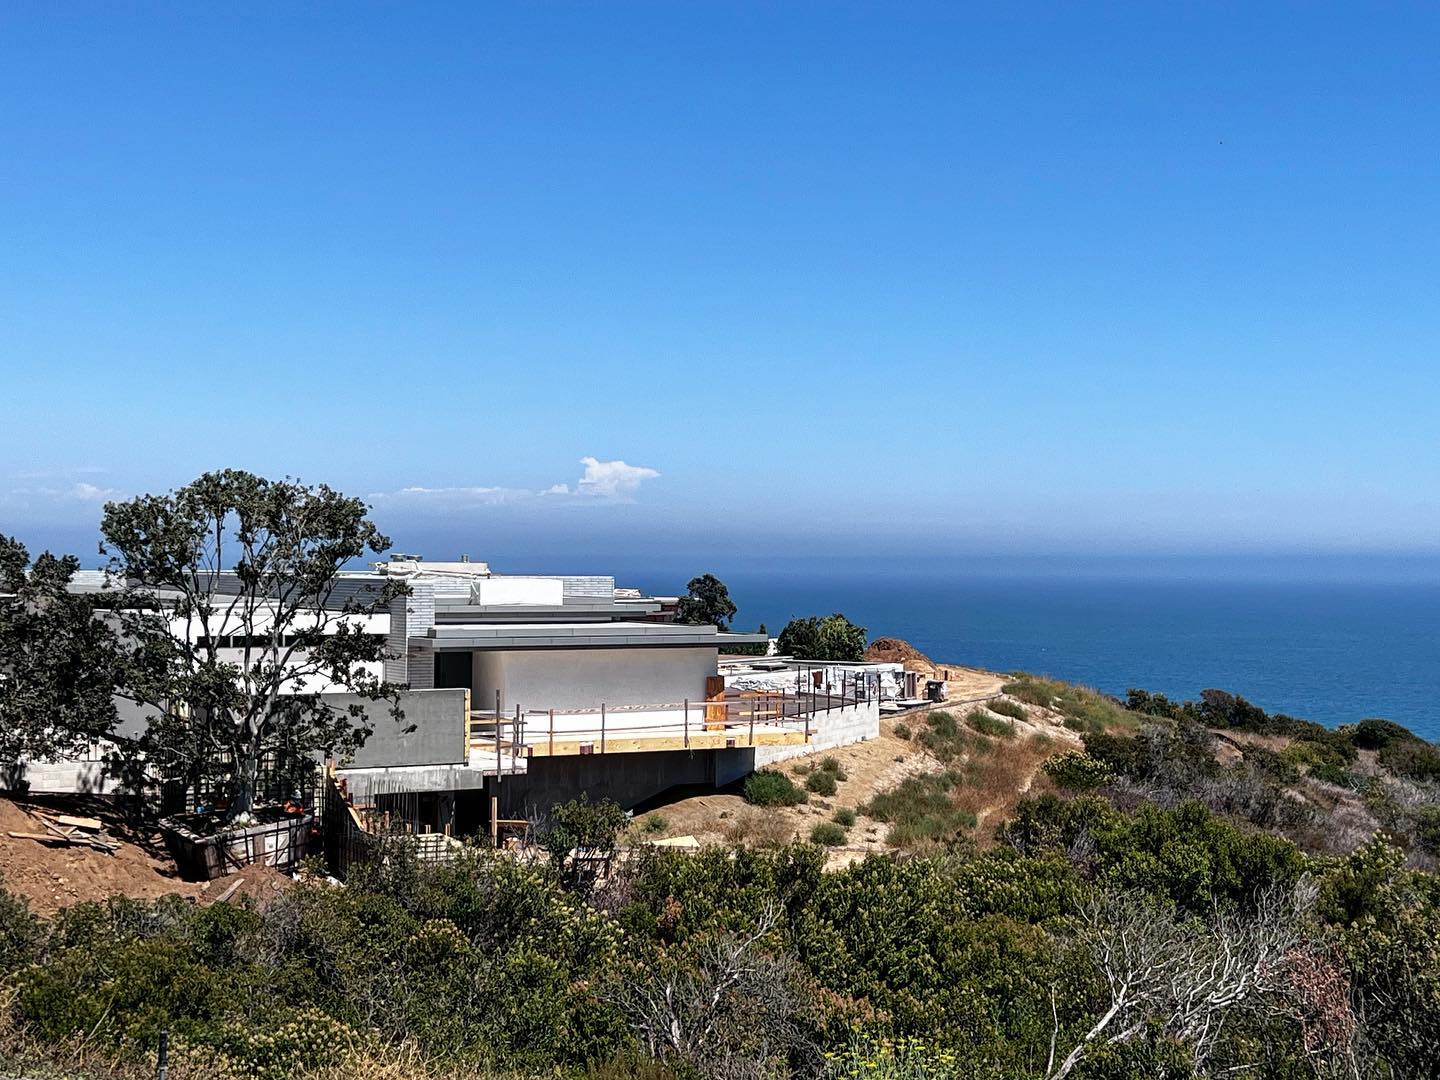 It was very important during the design process to keep these houses in line with the horizon, it appears this house is pushed into the hillside. The home is very deceiving, it is approximately 10,500 ft.². The deck alone, it’s over 10,000 ft.² The view isn’t haft bad either. #theedge is one of five homes located within a private community in Malibu. Currently available for sale… @sandrodazzan The Case has arrived and available for for the high buyer. #scottgillendesign #thecase #private #privacy #billionairesbluff #photooftheday #art #photography #gillenit #design #architecture #california #interiordesign #losangeles #decor #realestate #interiors  #interiordesigner  #malibu #midcenturymodern #luxuryhome #architecturedesign  #luxurylisting #dreamhomes #unvarnished #thecase #themalibuseries #unvarnishedCo #thenewcastle